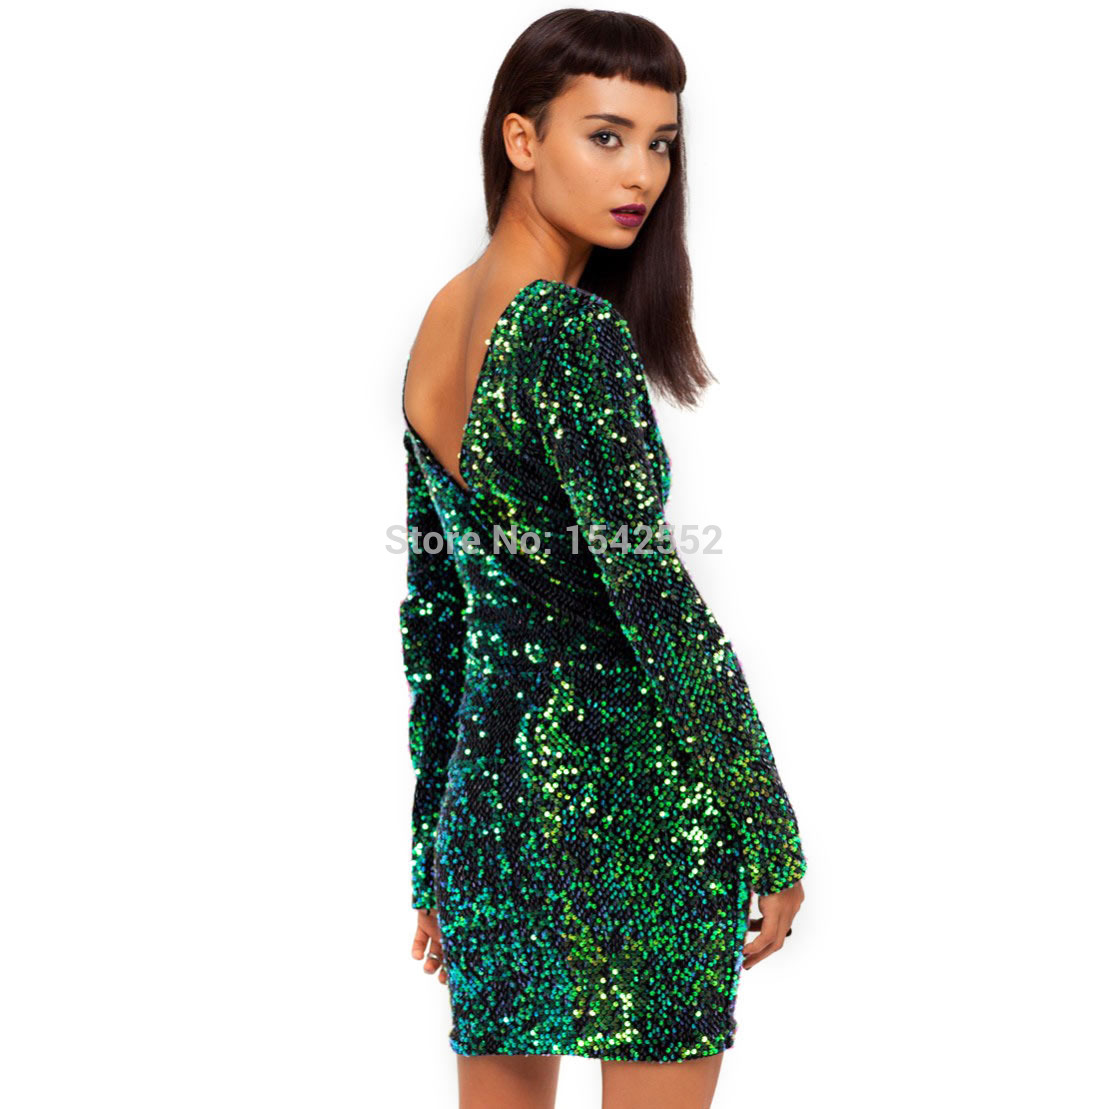 Metallic Dresses For Sale And Fashion Outlet Review